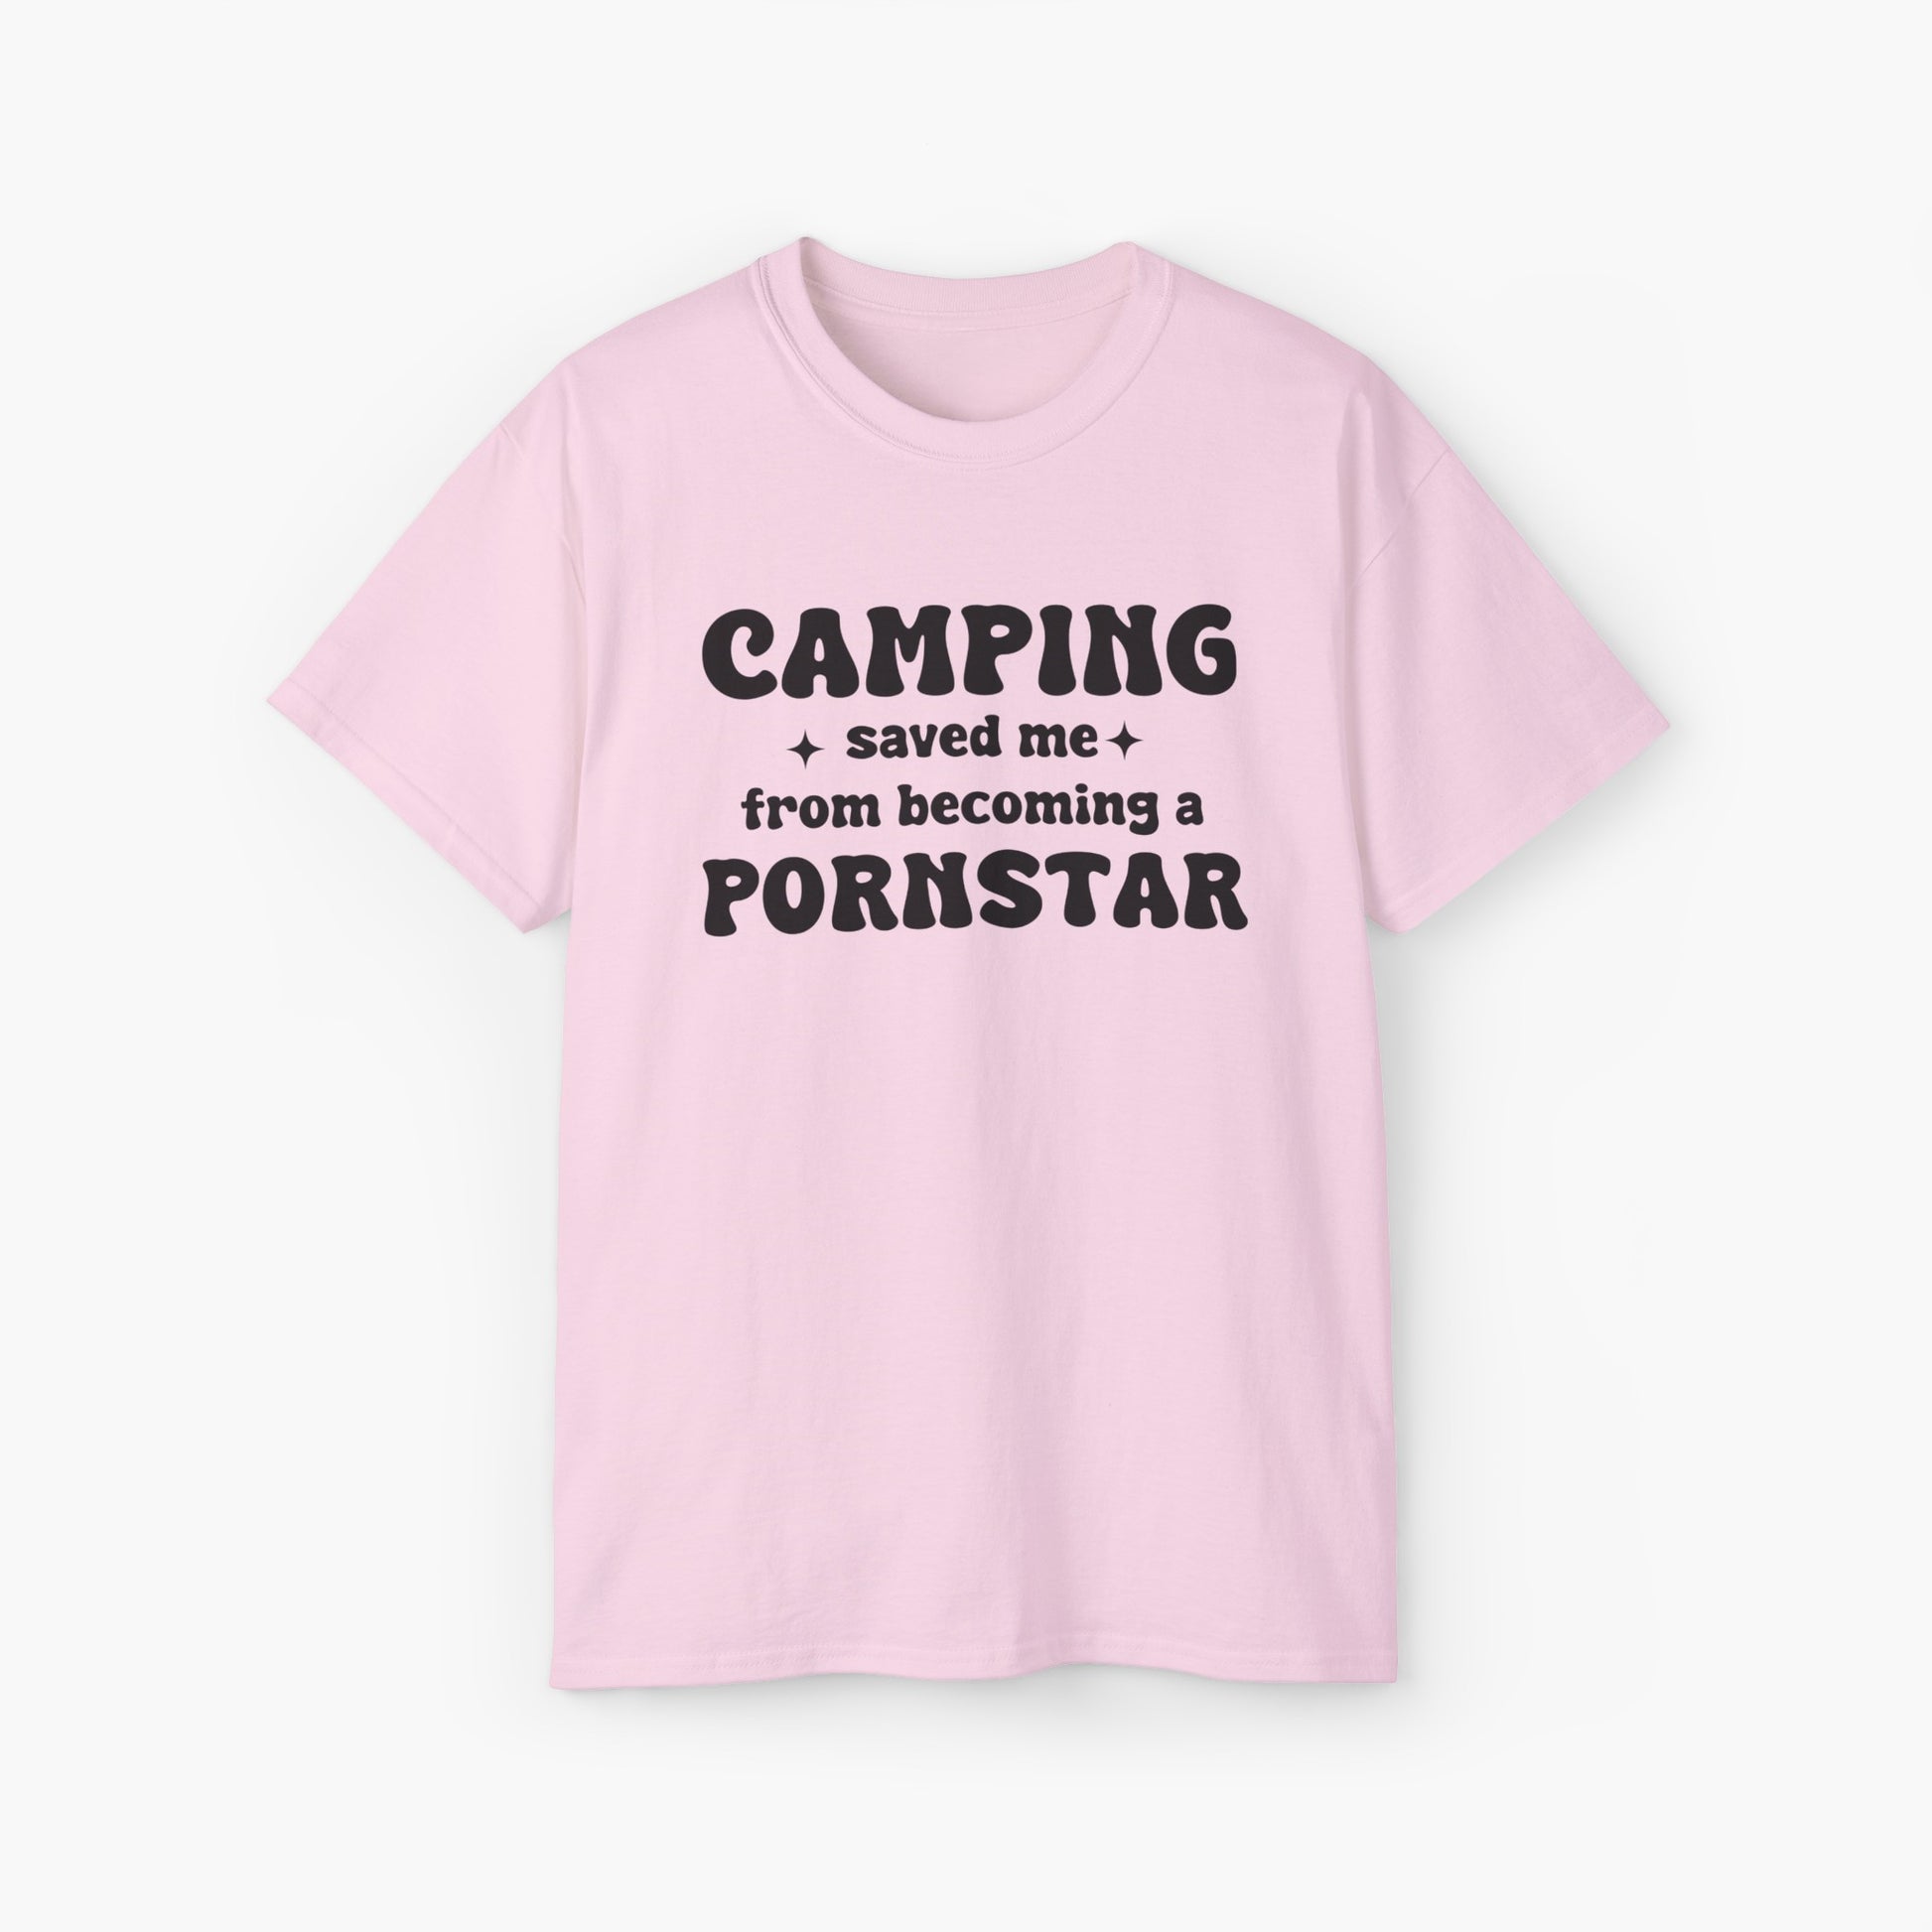 Light pink t-shirt with the bold statement 'Camping saved me from becoming a pornstar,' embellished with stars on a plain background.